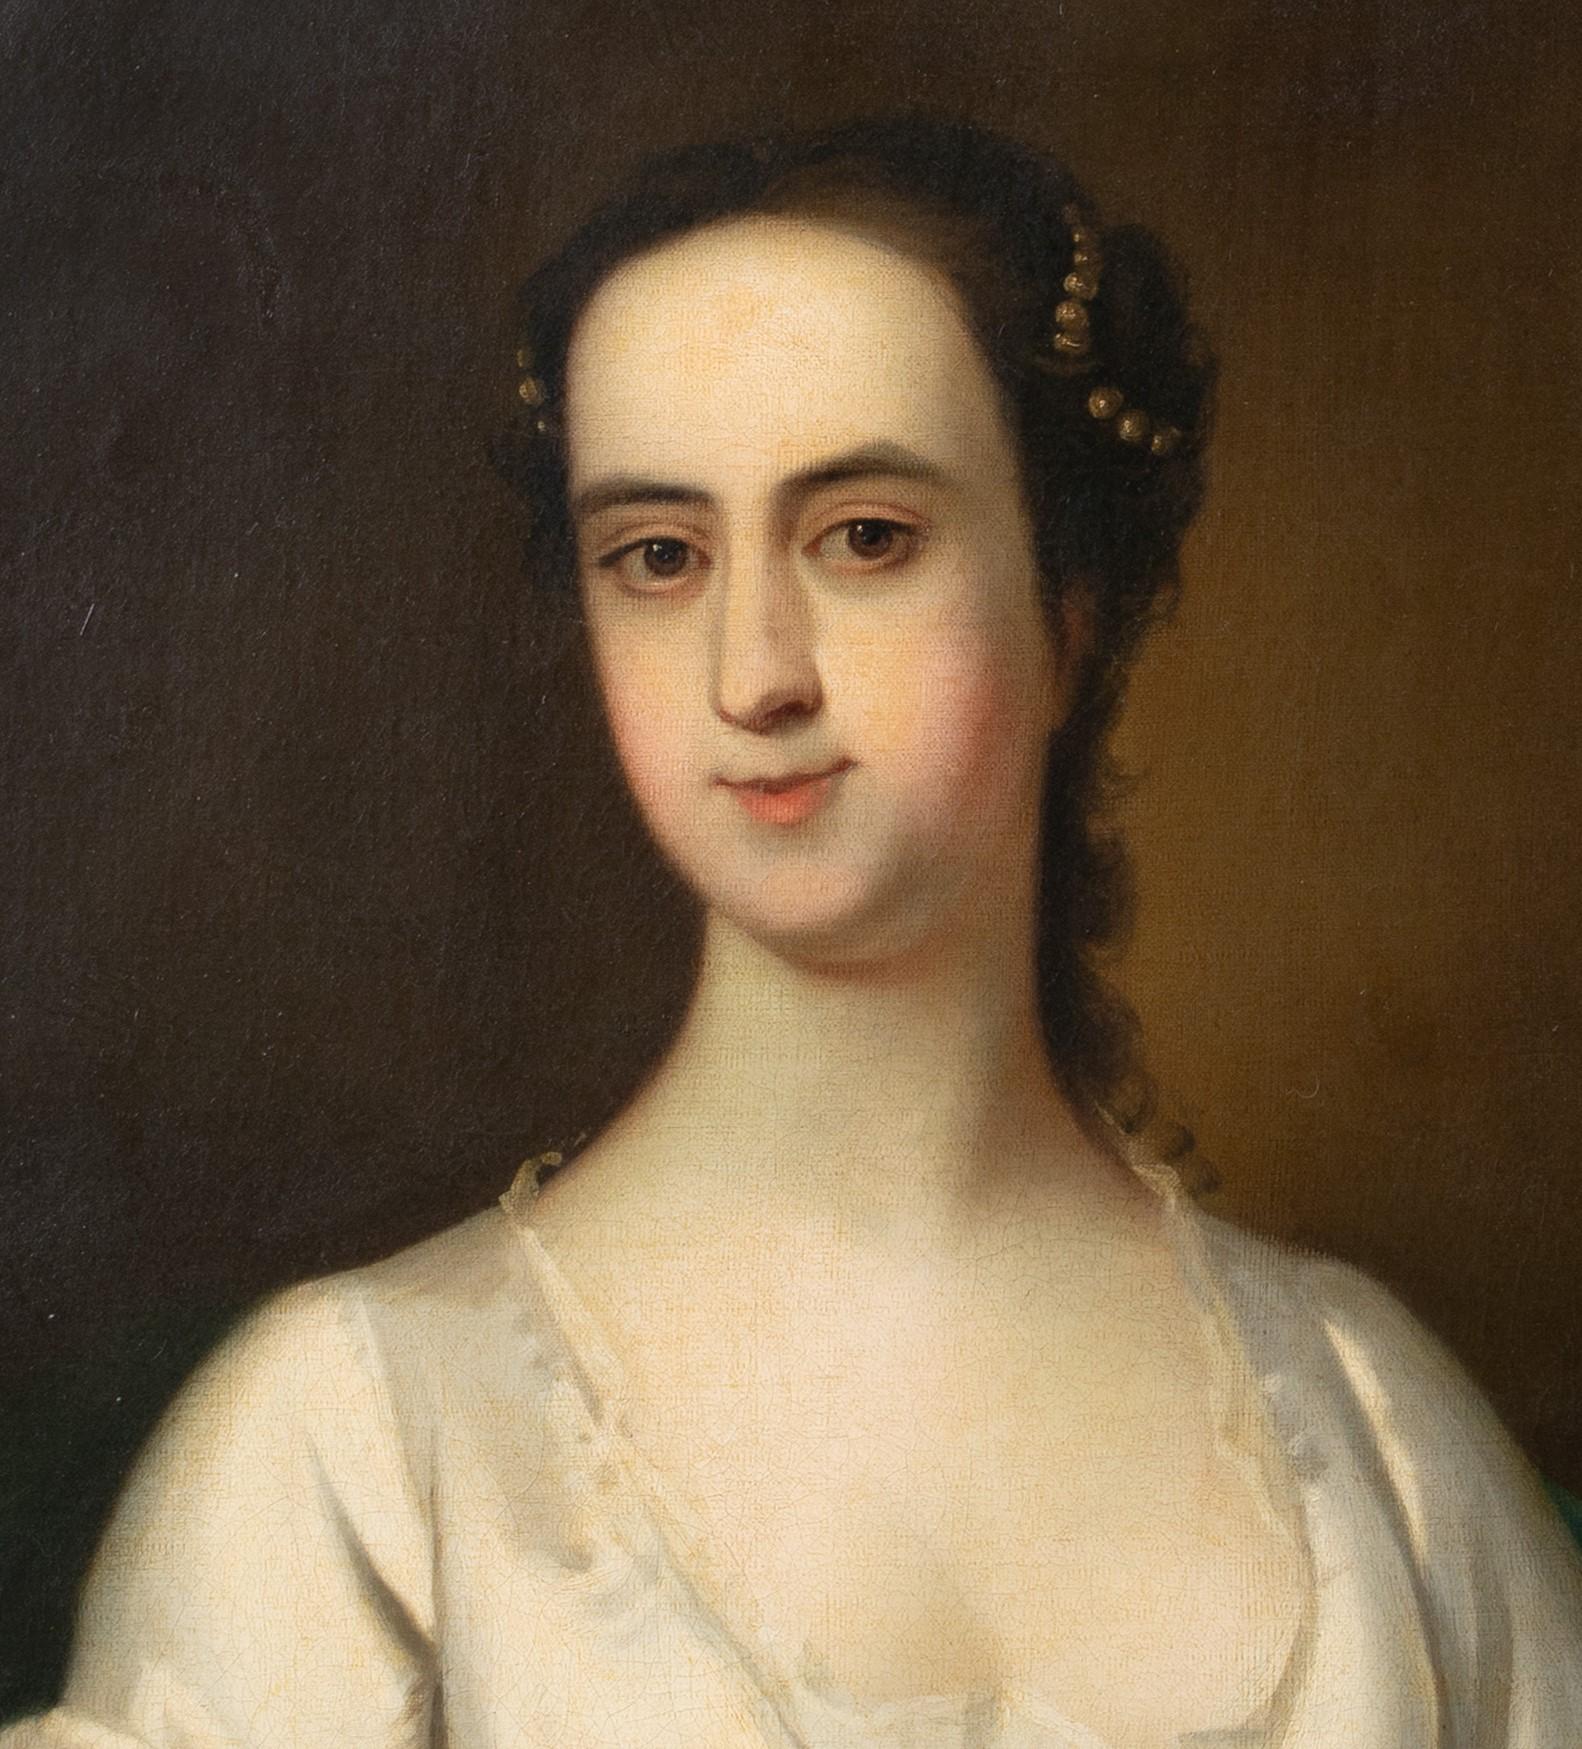 Portrait Of Lady Maynard, circa 1745 - Brown Portrait Painting by Unknown